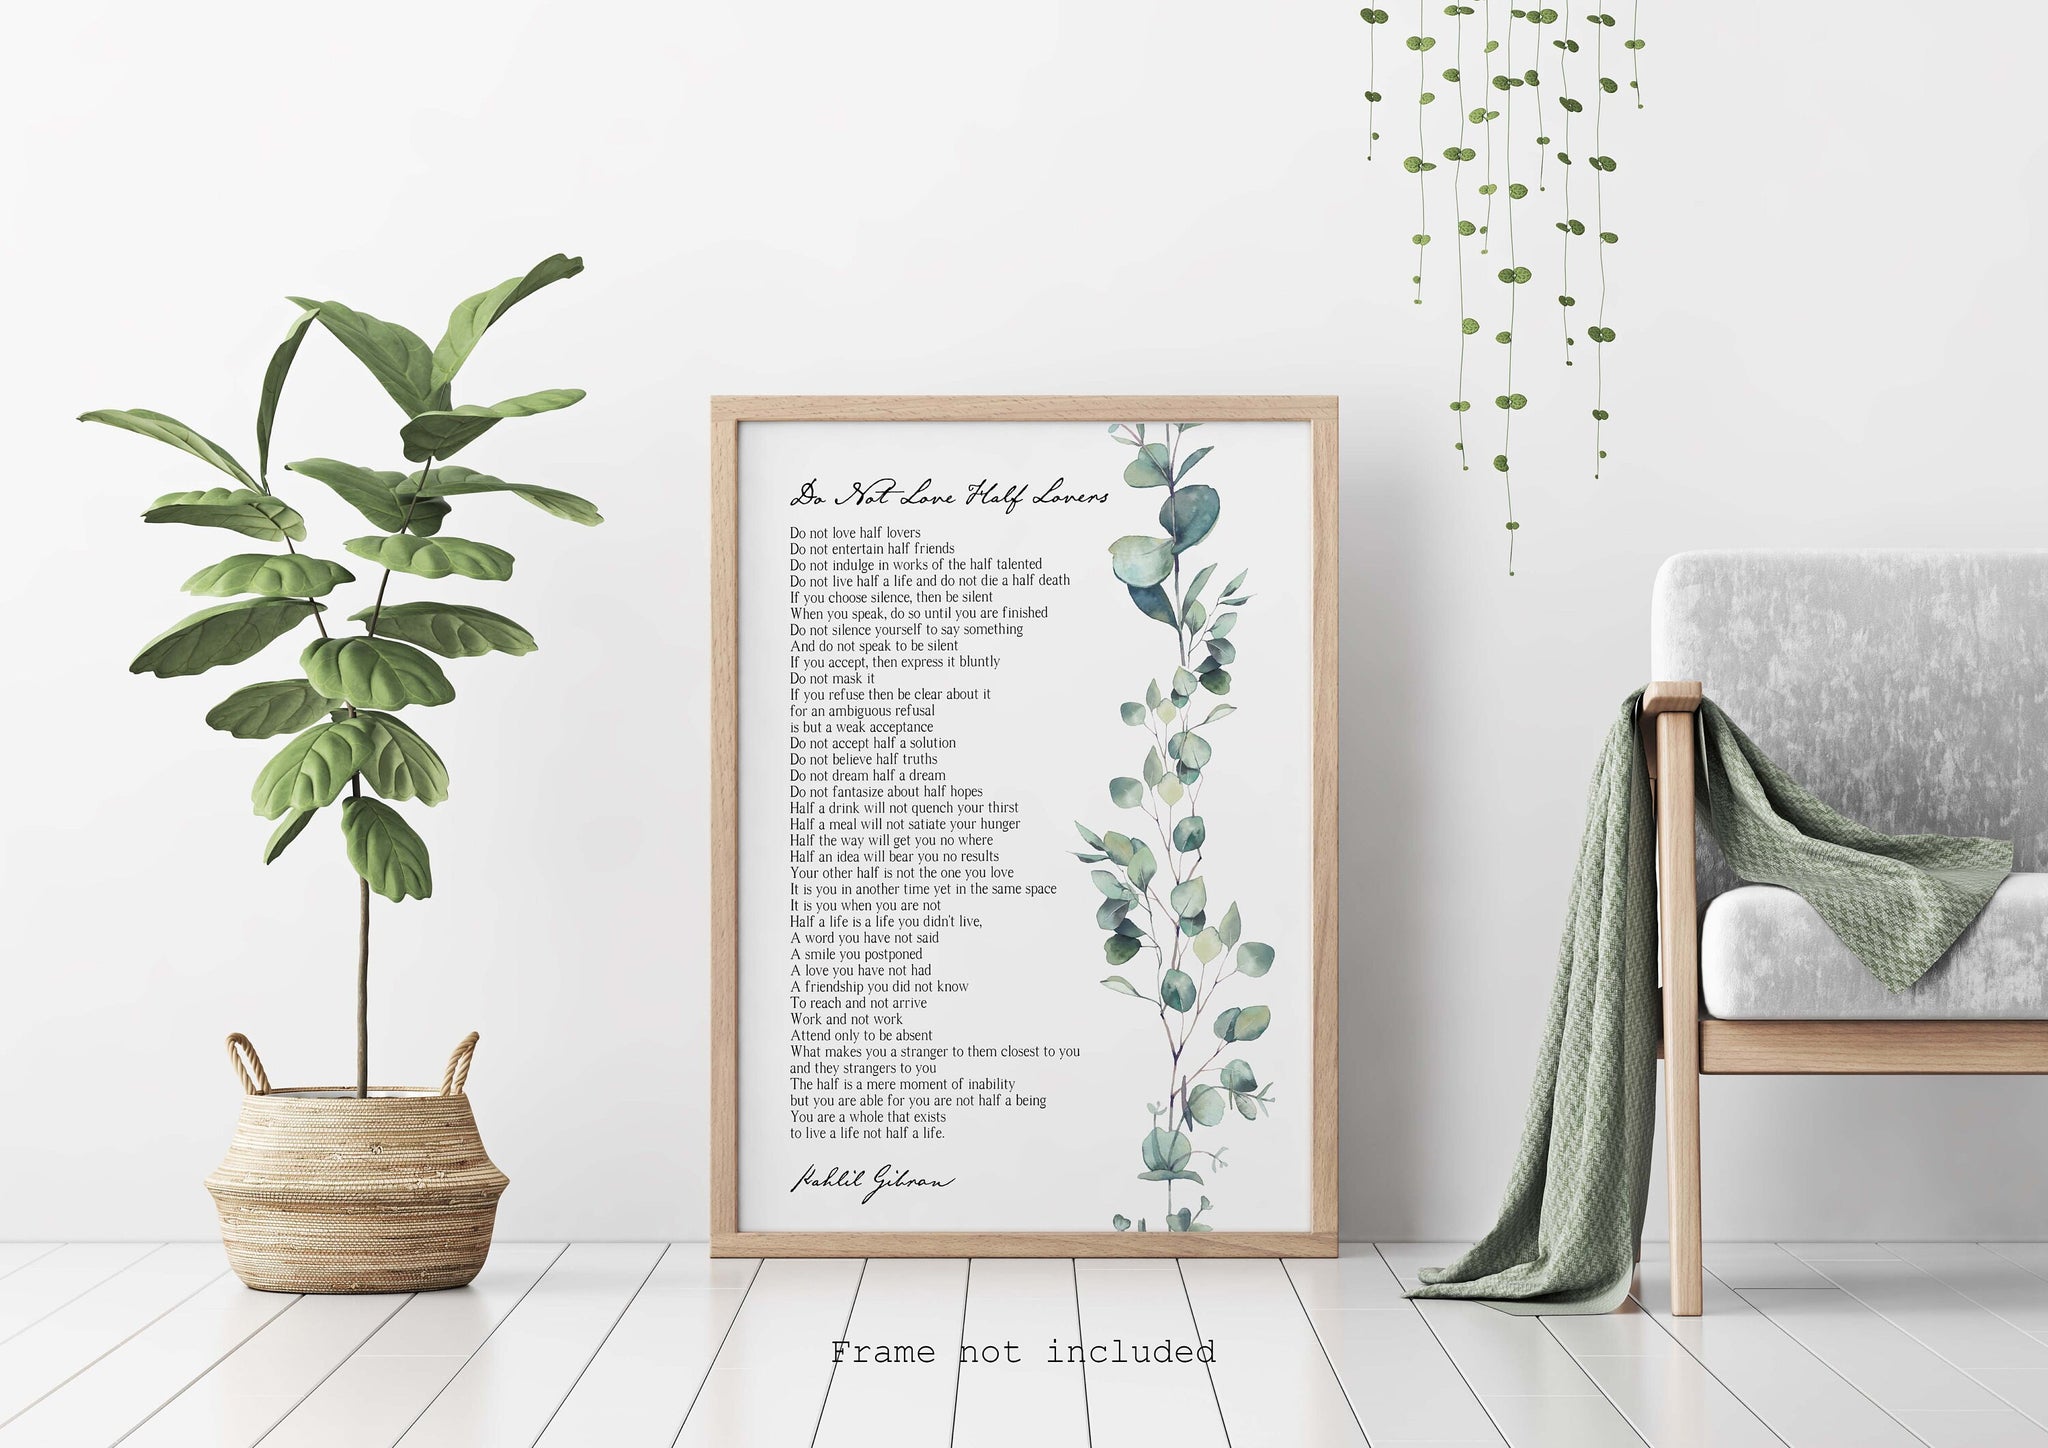 Do Not Love Half Lovers By Kahlil Gibran Poem Poster Painting Prints Living  Room Art Wall Decor Pictures for Bathroom Canvas Artwork Pictures for